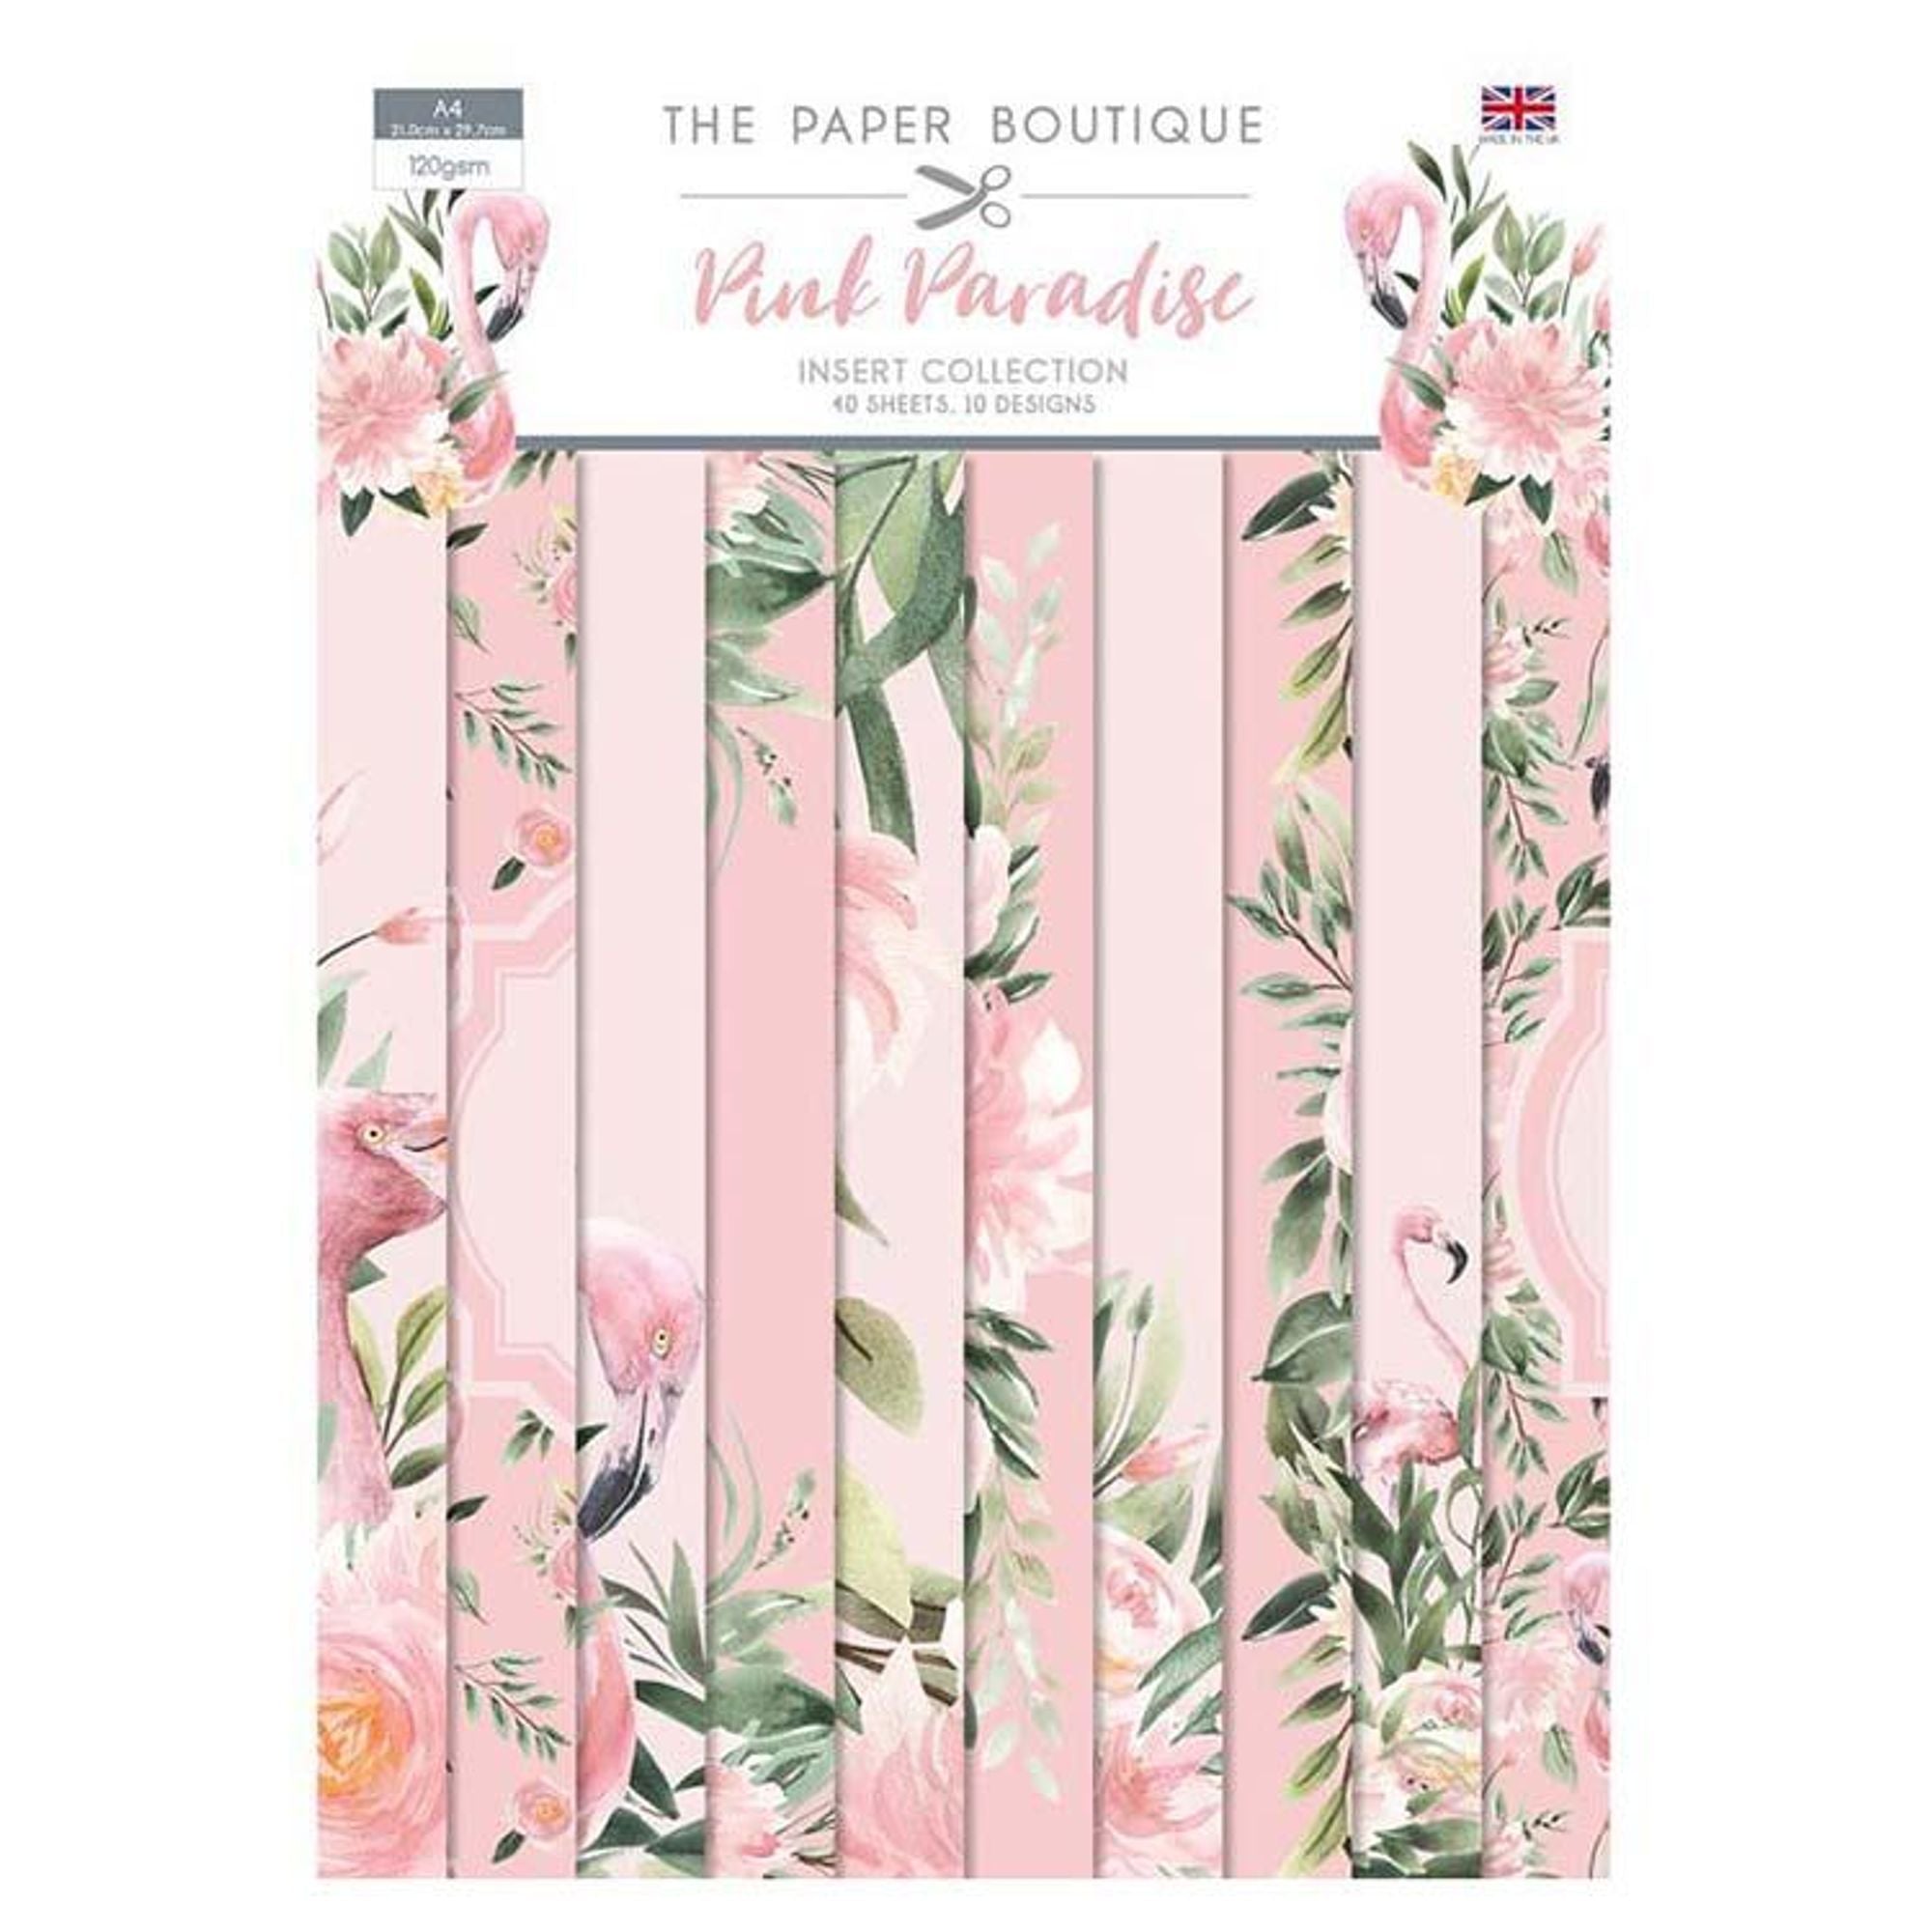 The Paper Boutique Pink Paradise Insert Collection A4 40 Sheets 10 Designs 120gsm